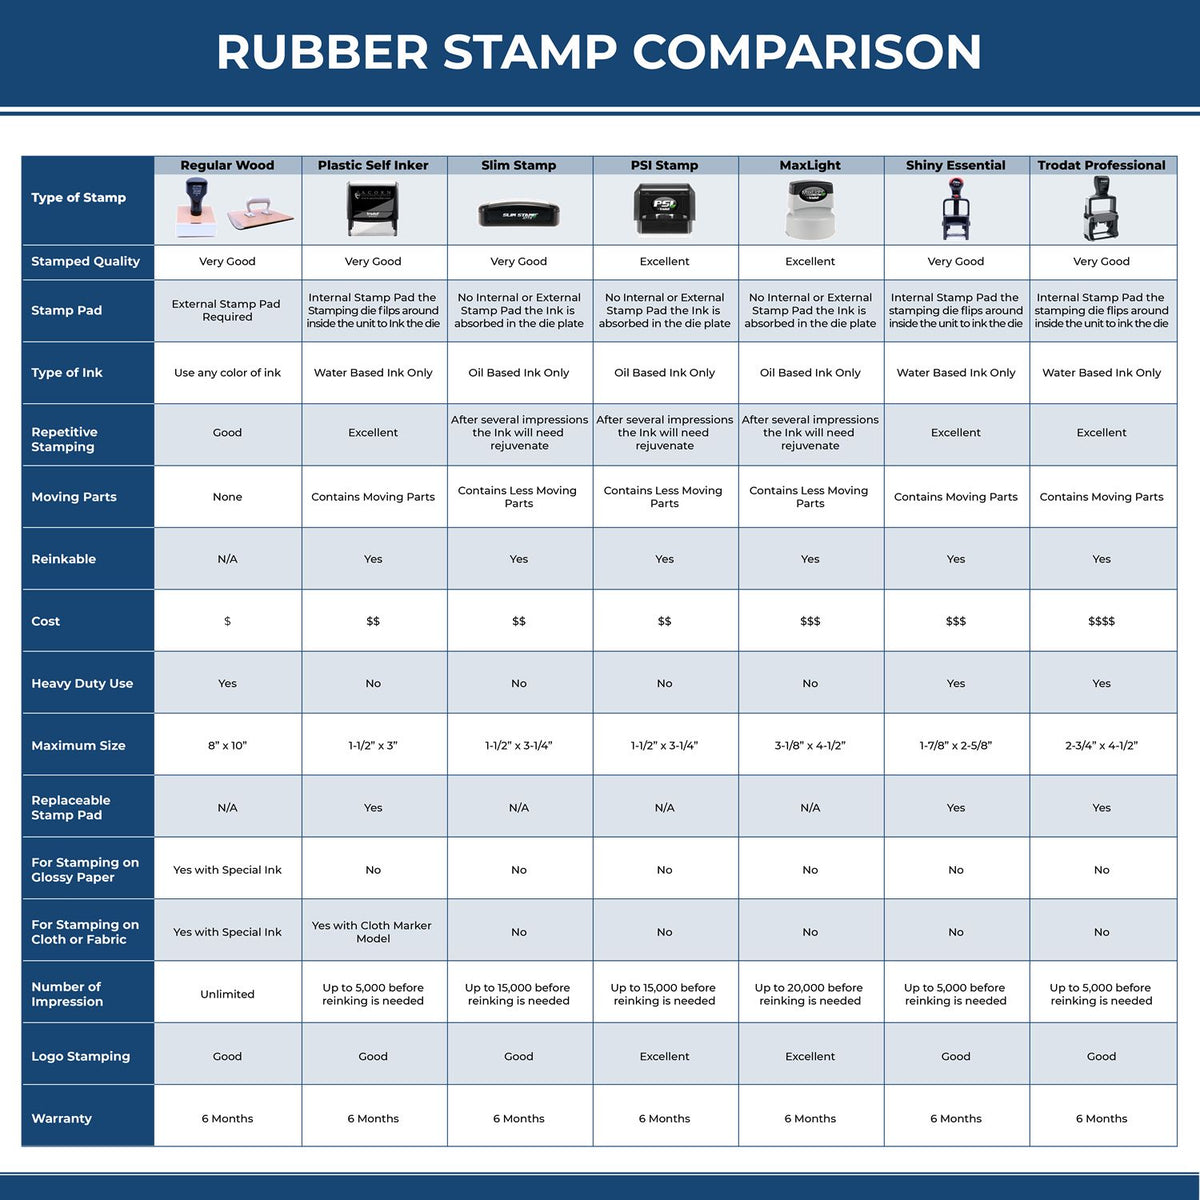 A comparison chart for the different types of mount models available for the Premium MaxLight Pre-Inked New Hampshire Landscape Architectural Stamp.